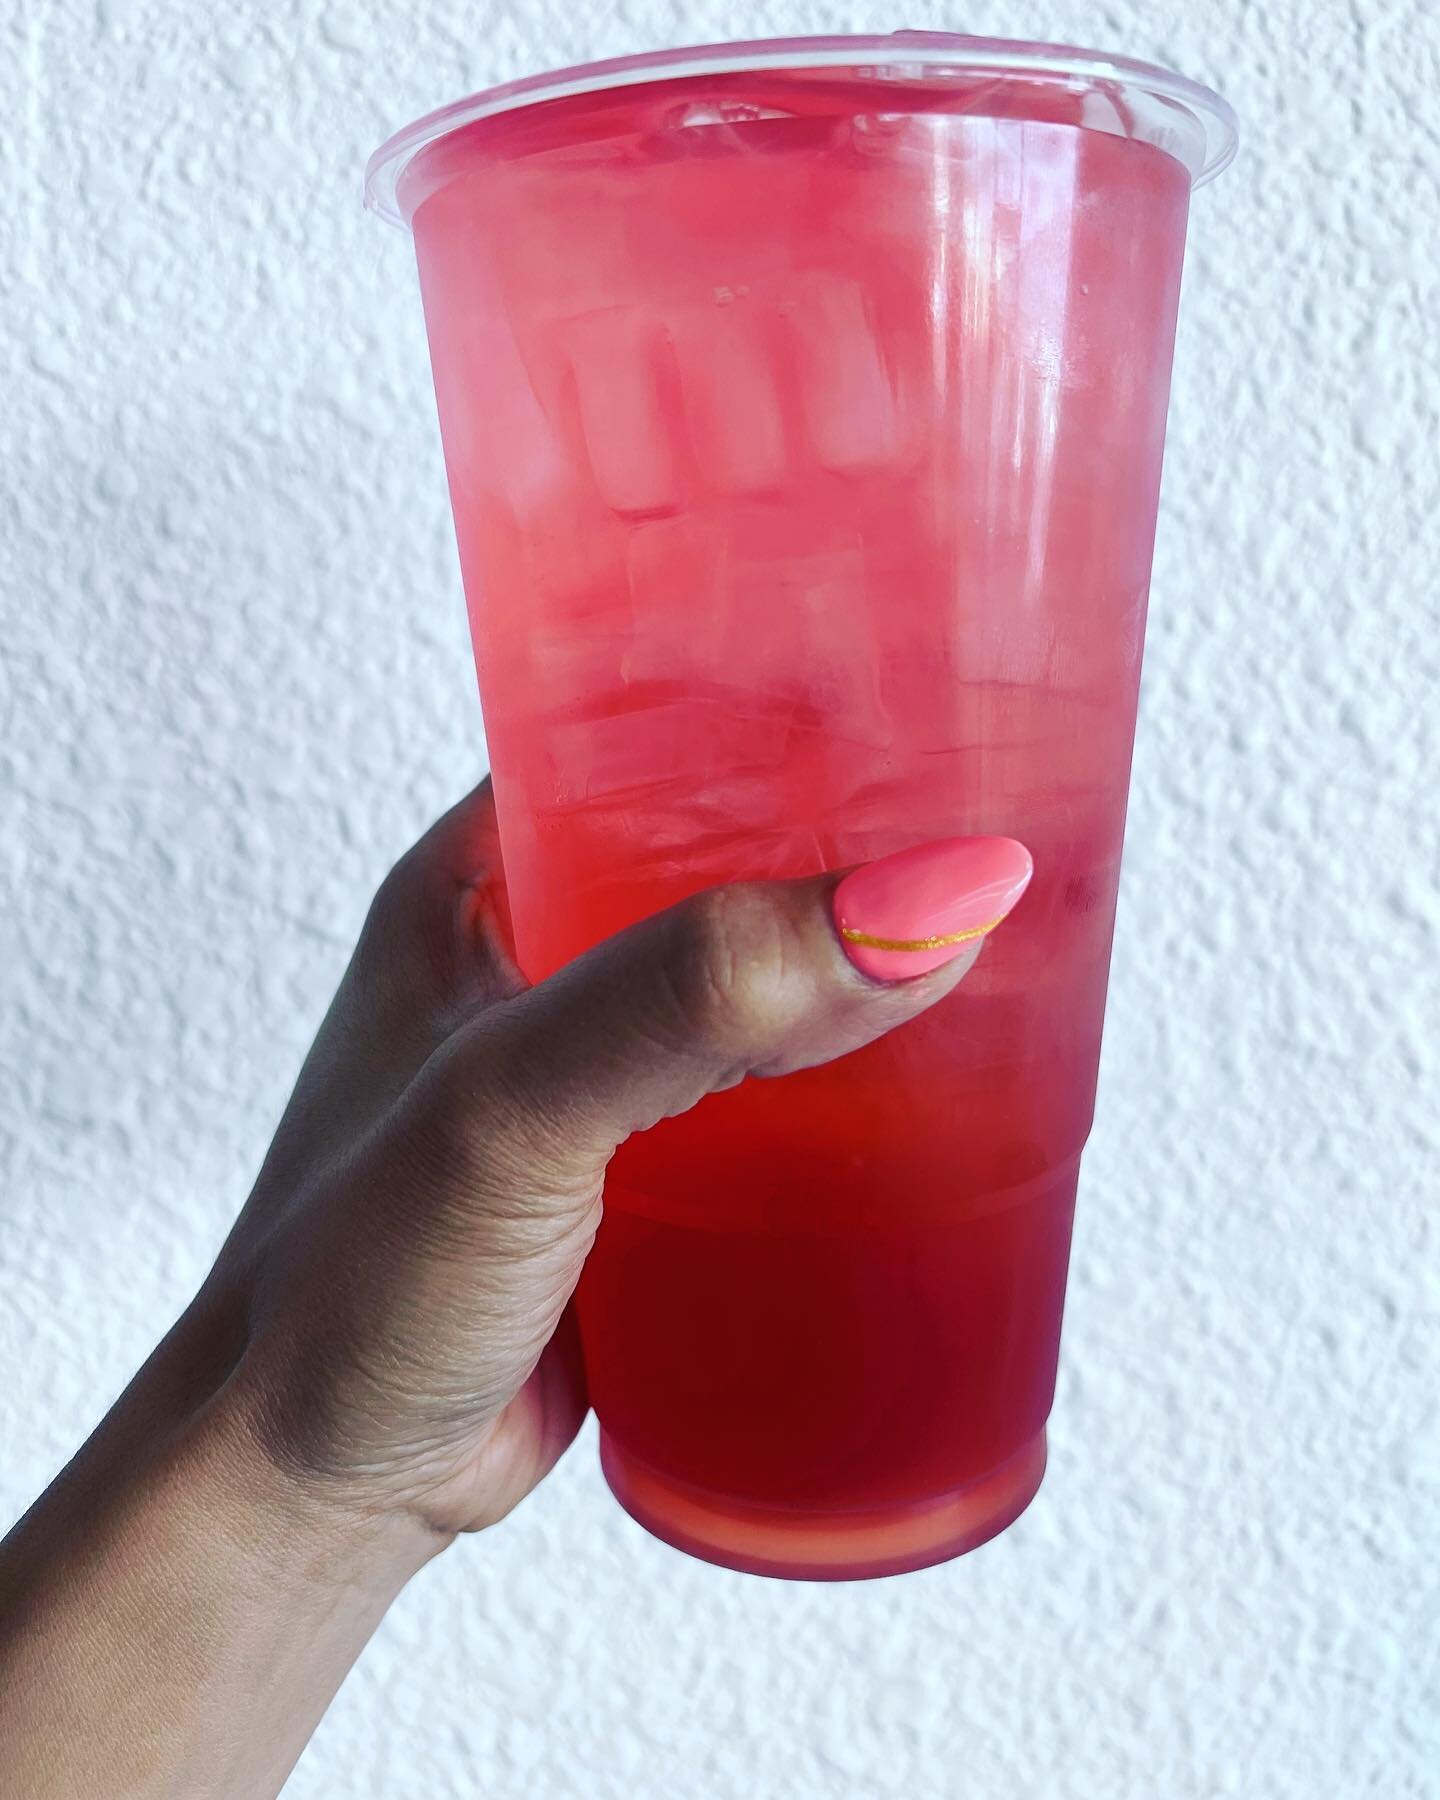 Pink 🌺 Hibiscus

Light, refreshing and tightens up your skin and gives you energy! 

Limited time only! 

#junemenu #chillnutritionlodi #lodihealthydrinks #nutrition #fitness #results #lodiproteinshakes #postrecovery #lodishakes